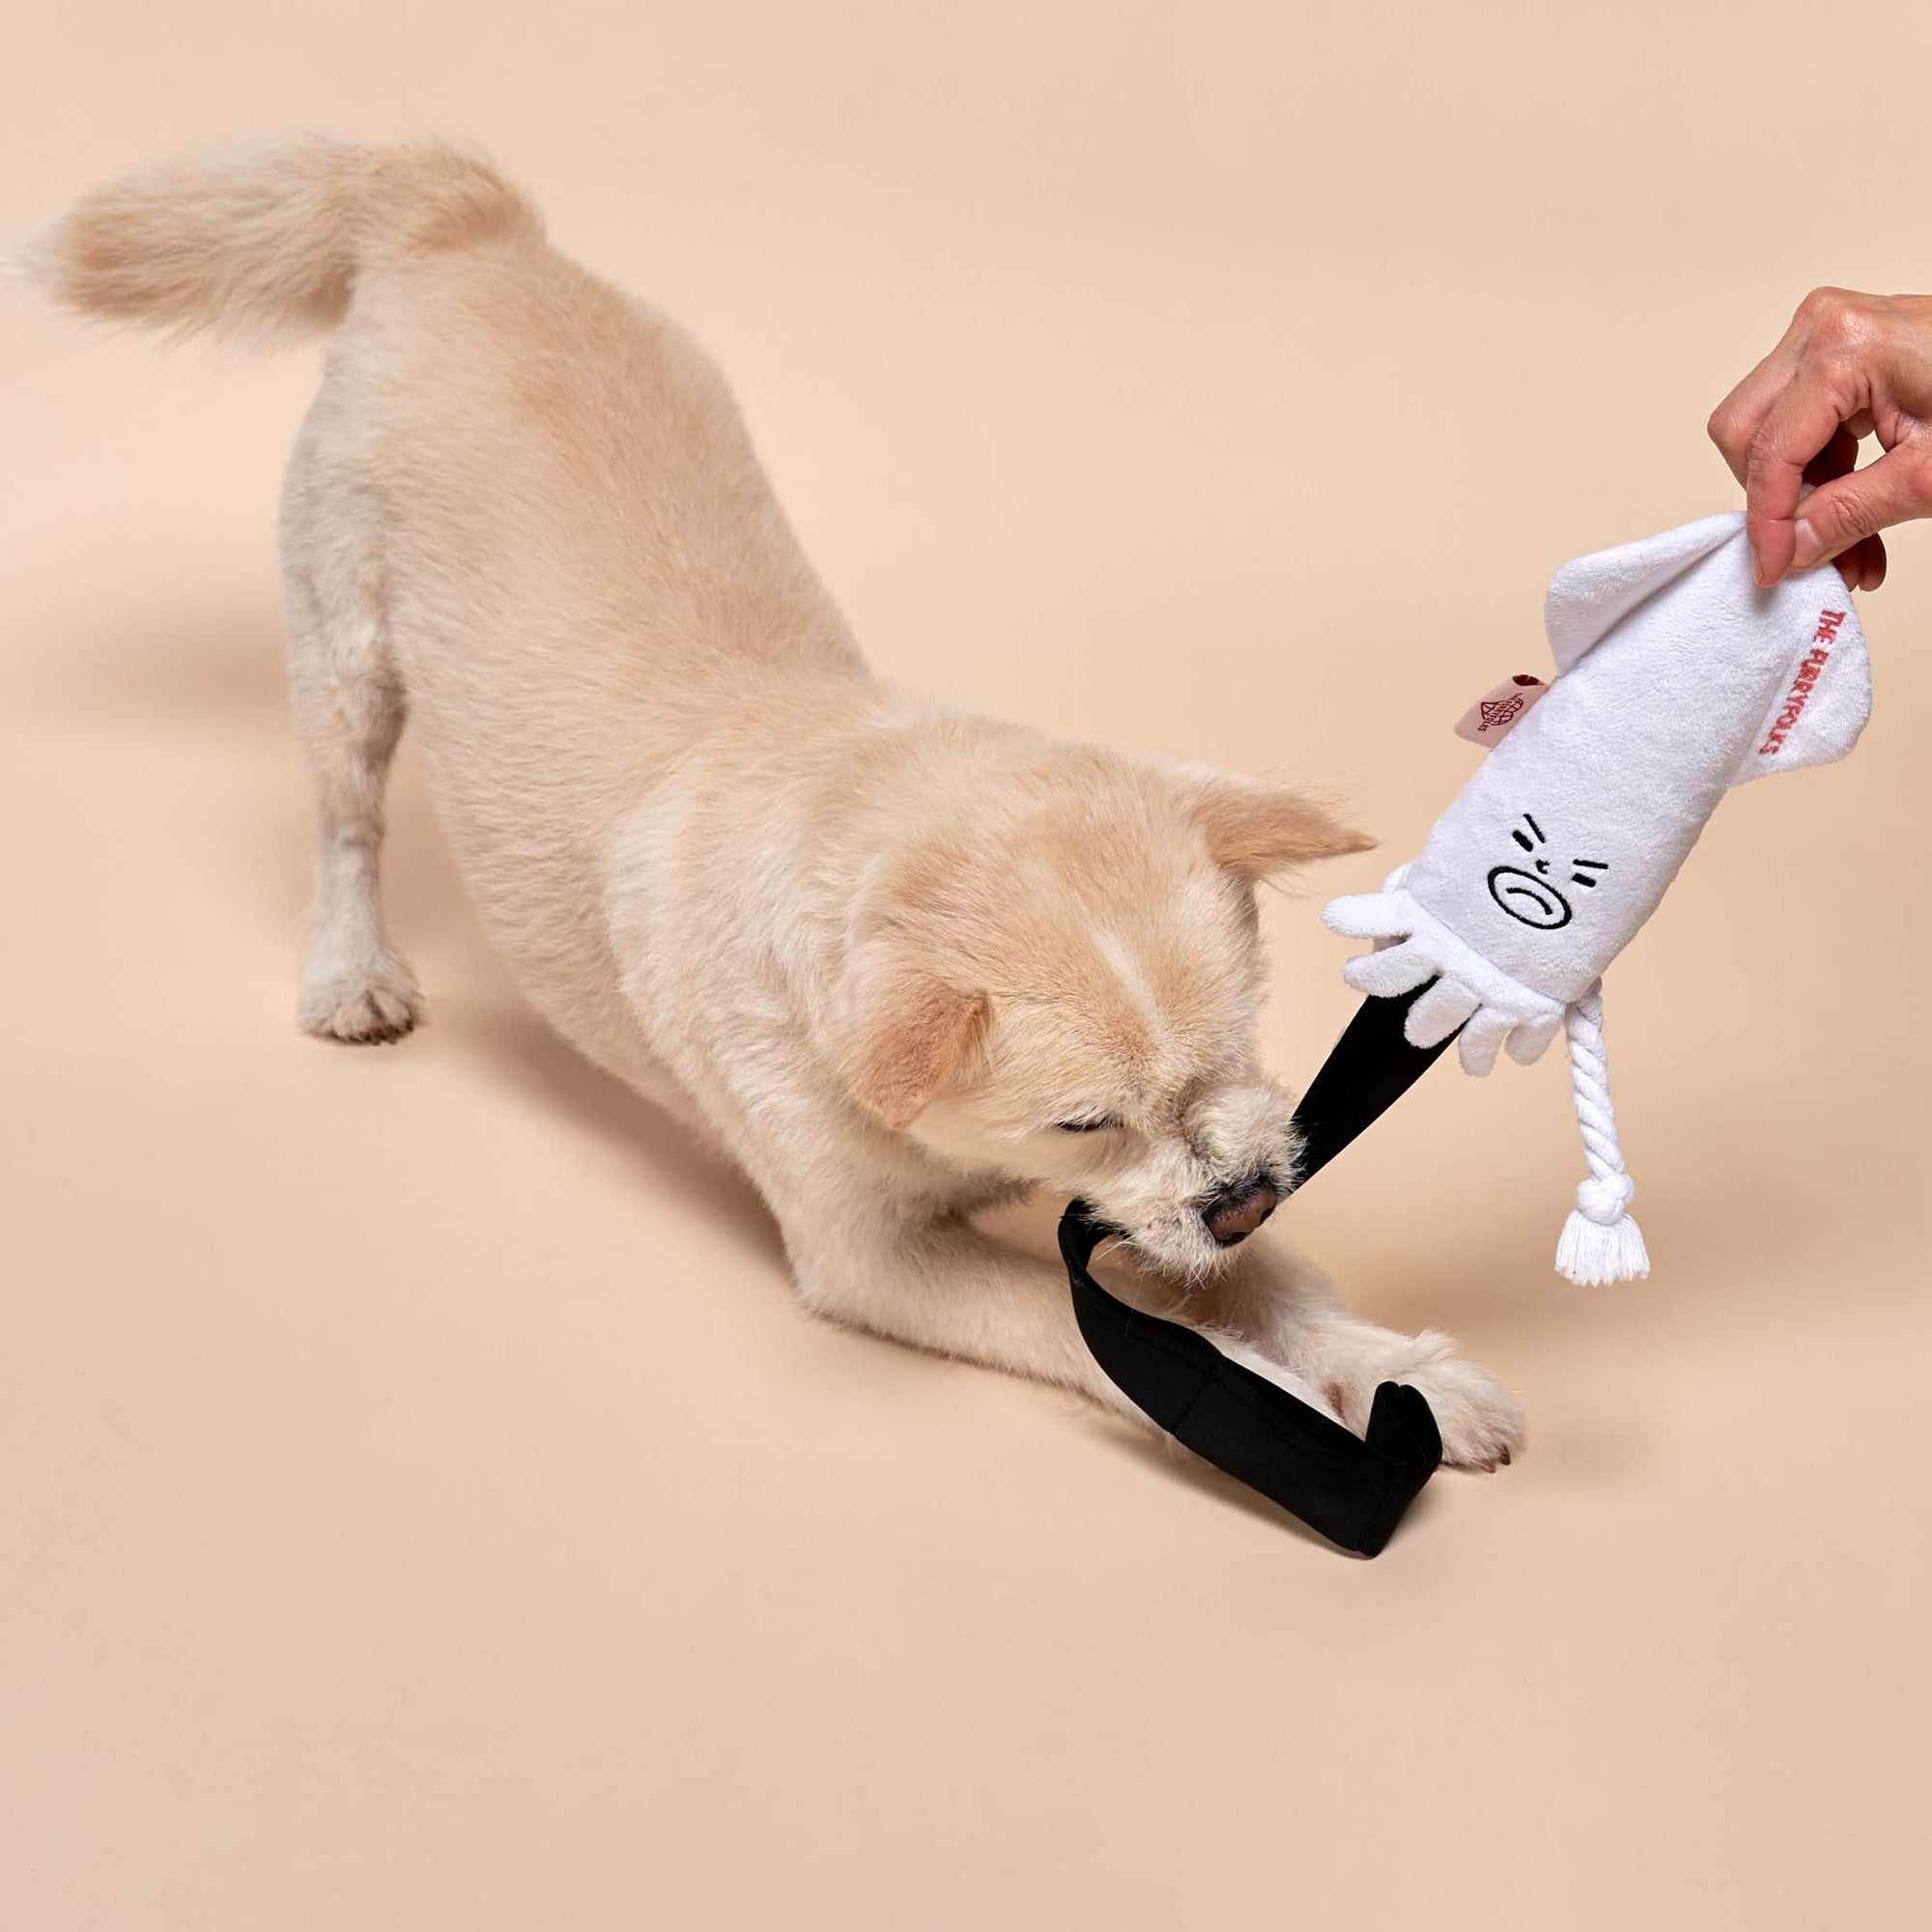 Engaged light-furred dog biting a white squid toy, playing tug-of-war.